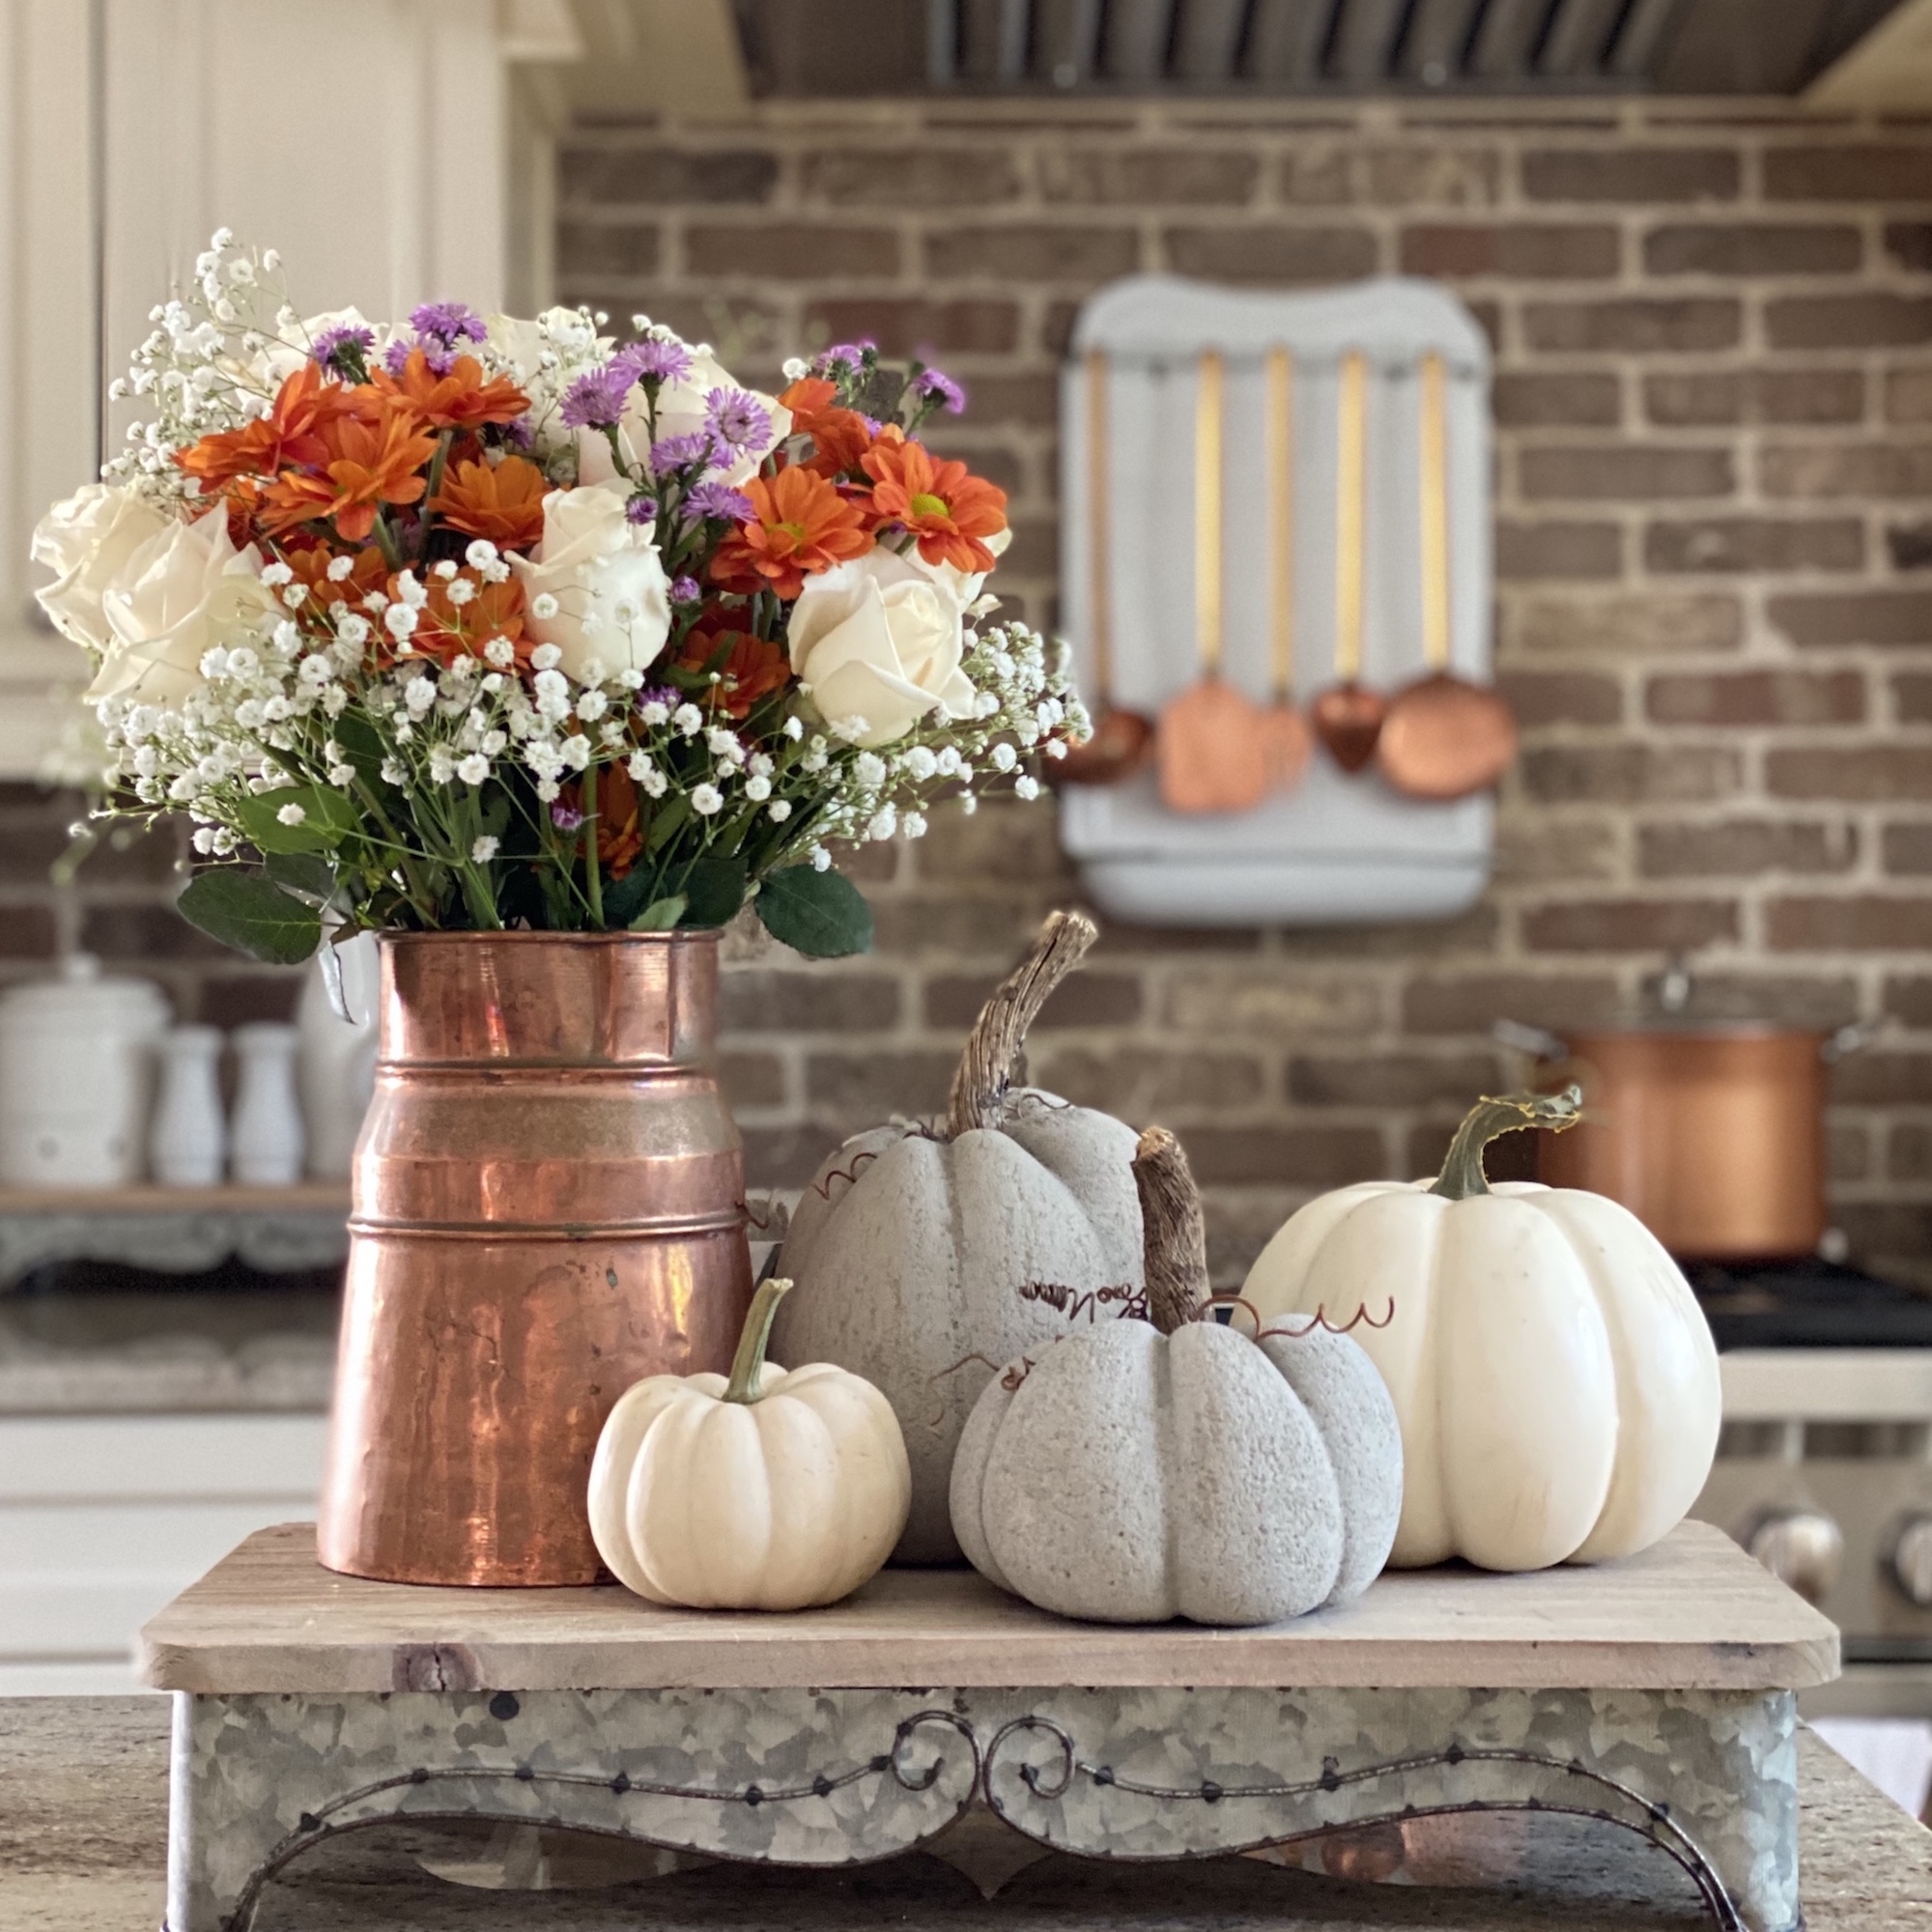 A copper pitcher on a riser with a fall floral arrangement in it, surrounded by pumpkins. In the background is a copper pot on the stove and and copper utensils hanging above it.